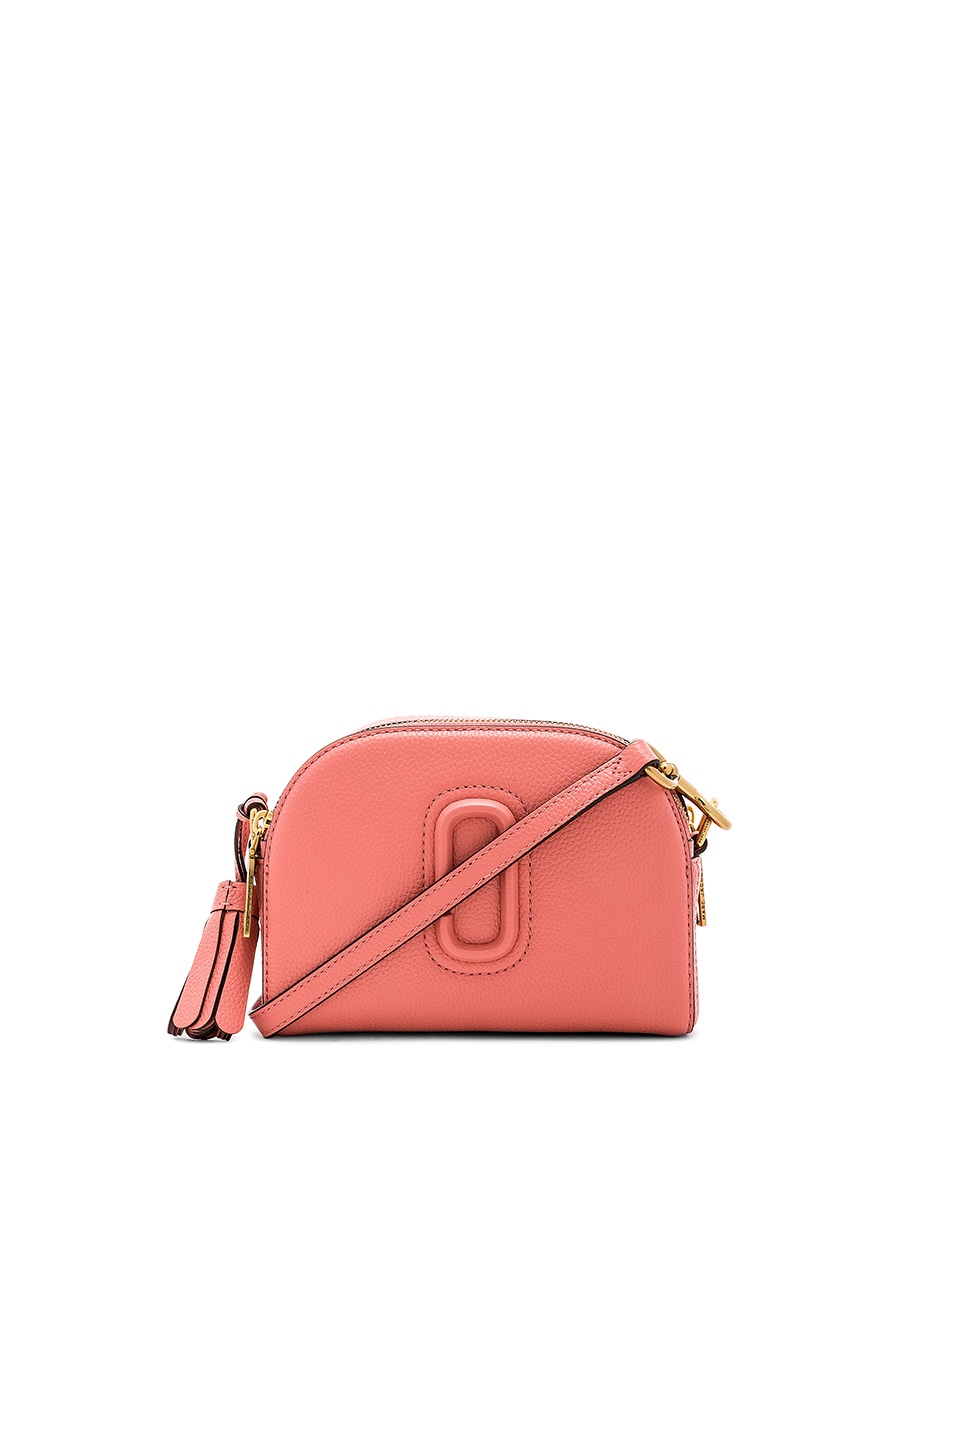 MARC JACOBS MARC JACOBS SHUTTER BAG IN CORAL.,MARJ-WY368